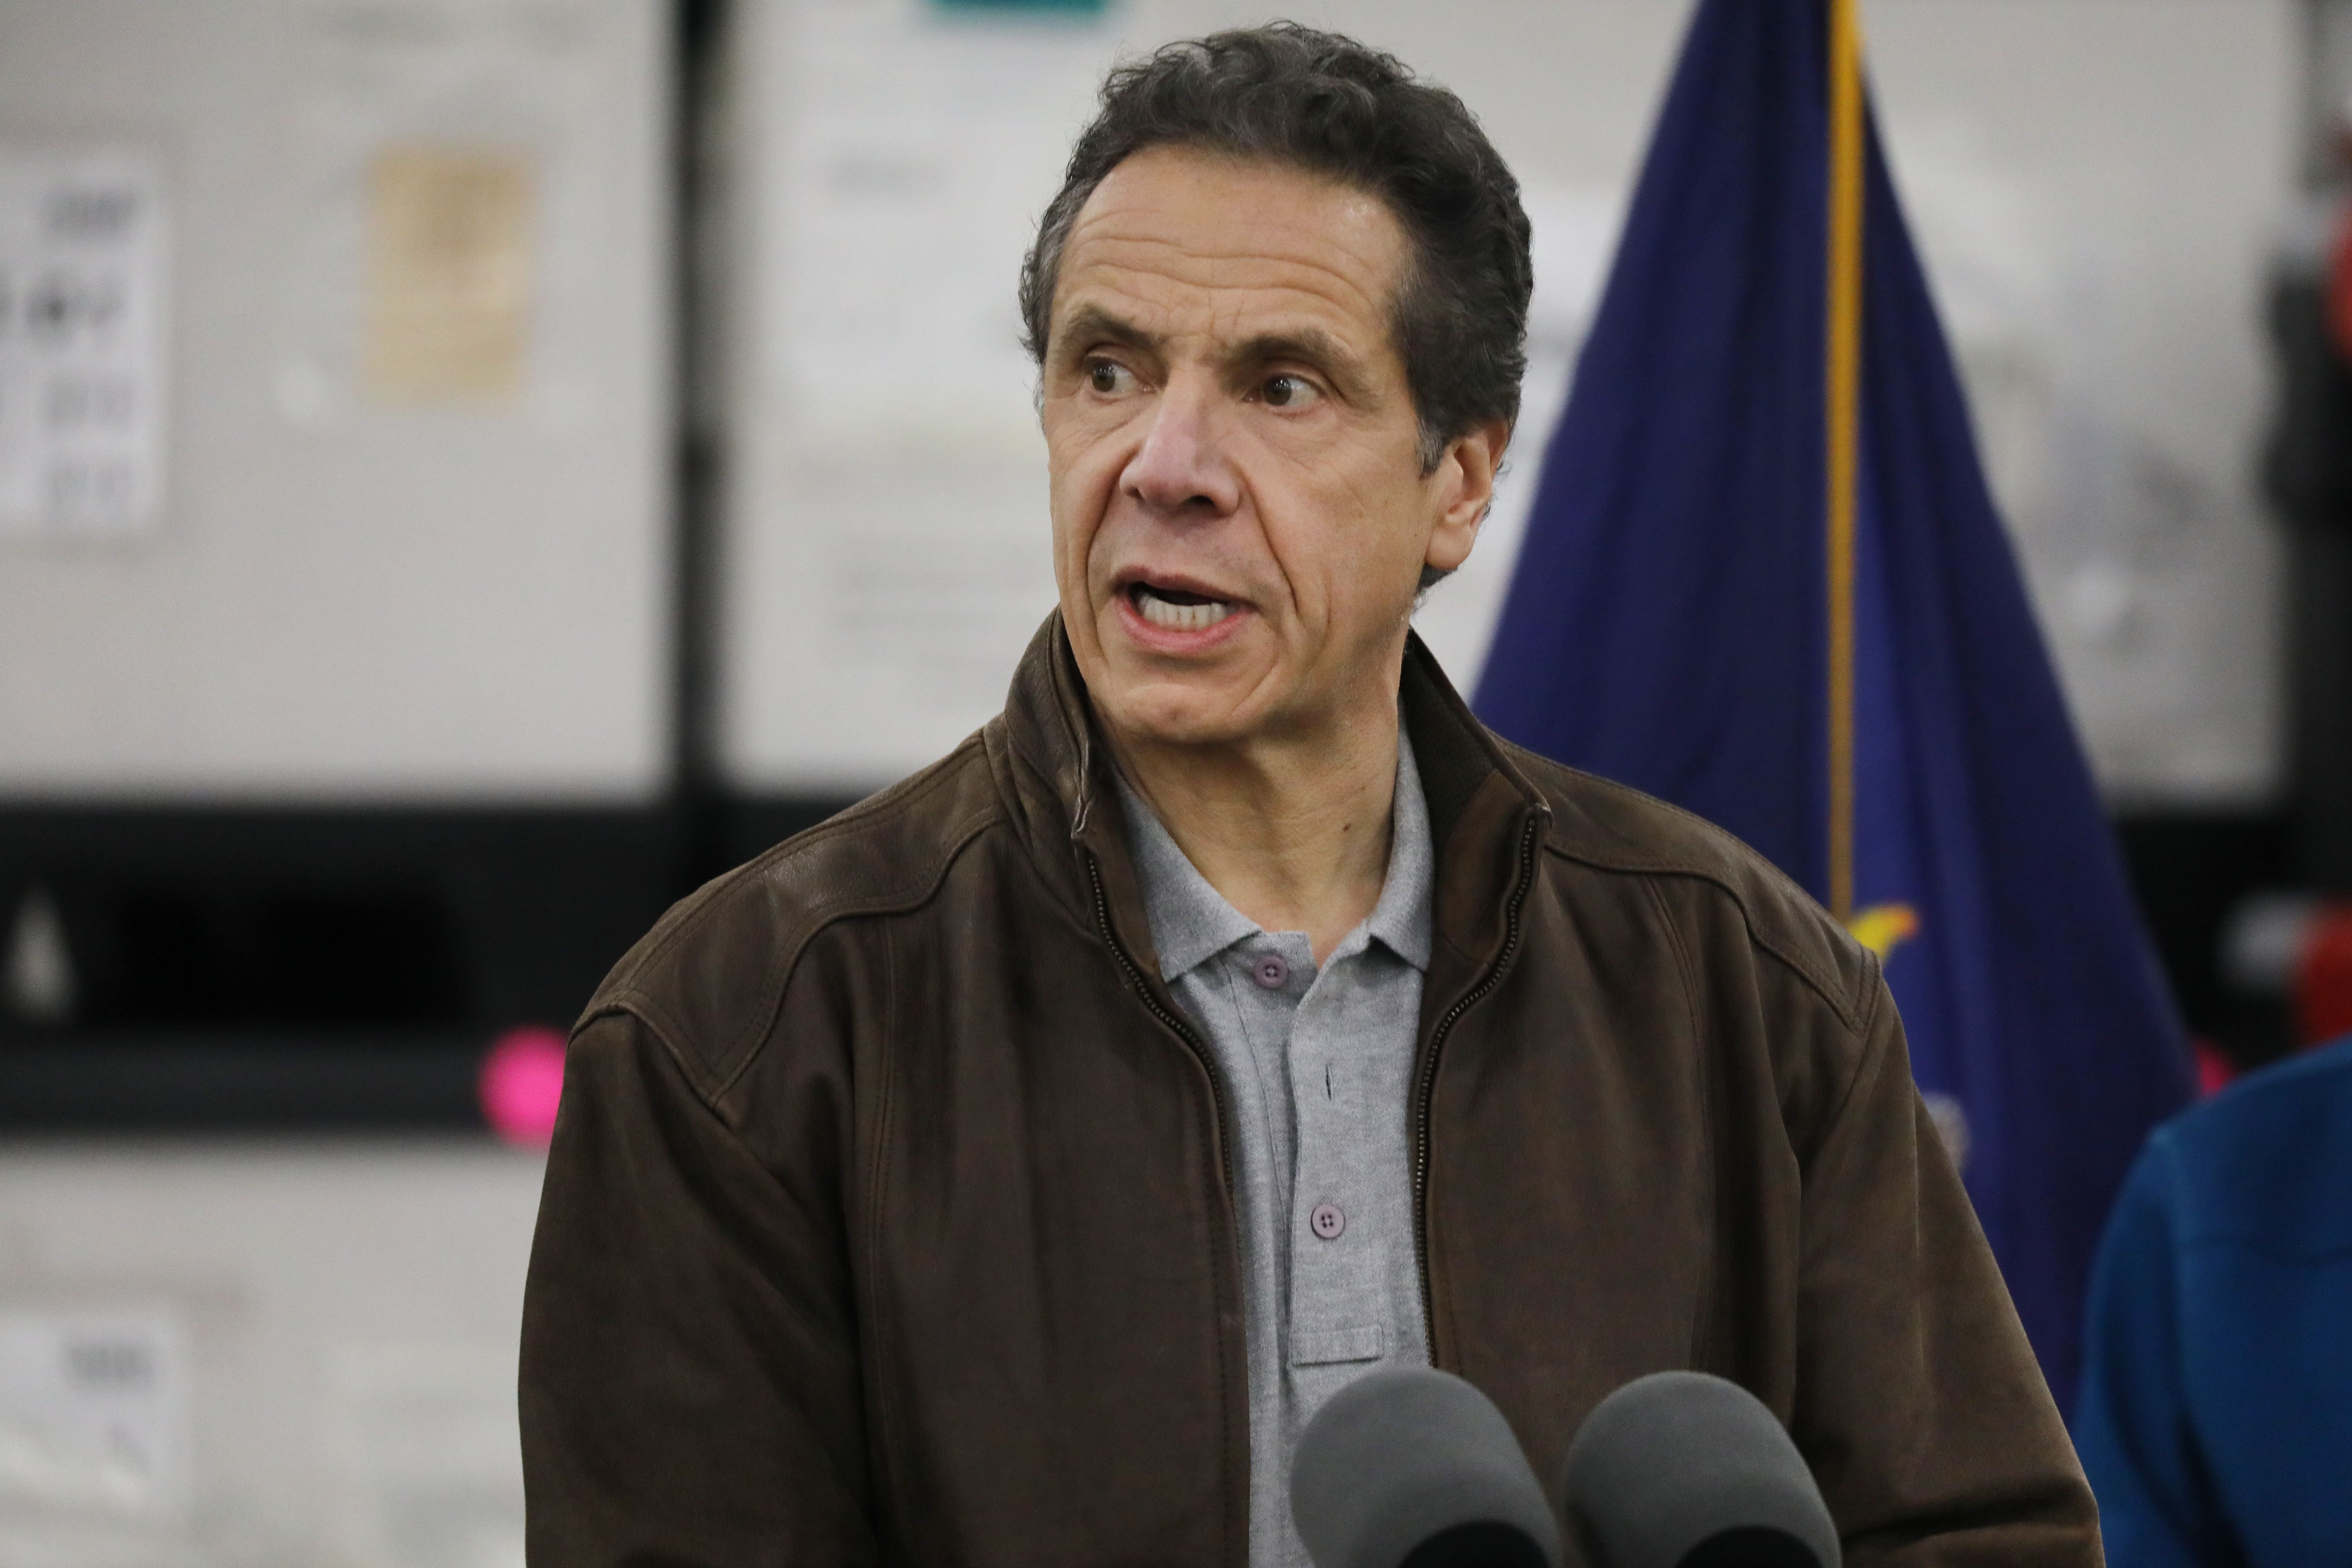 Andrew Cuomo spoke to the media and members of the National Guard at the Javits Convention Center on March 23, 2020 in New York City | Photo: Getty Images